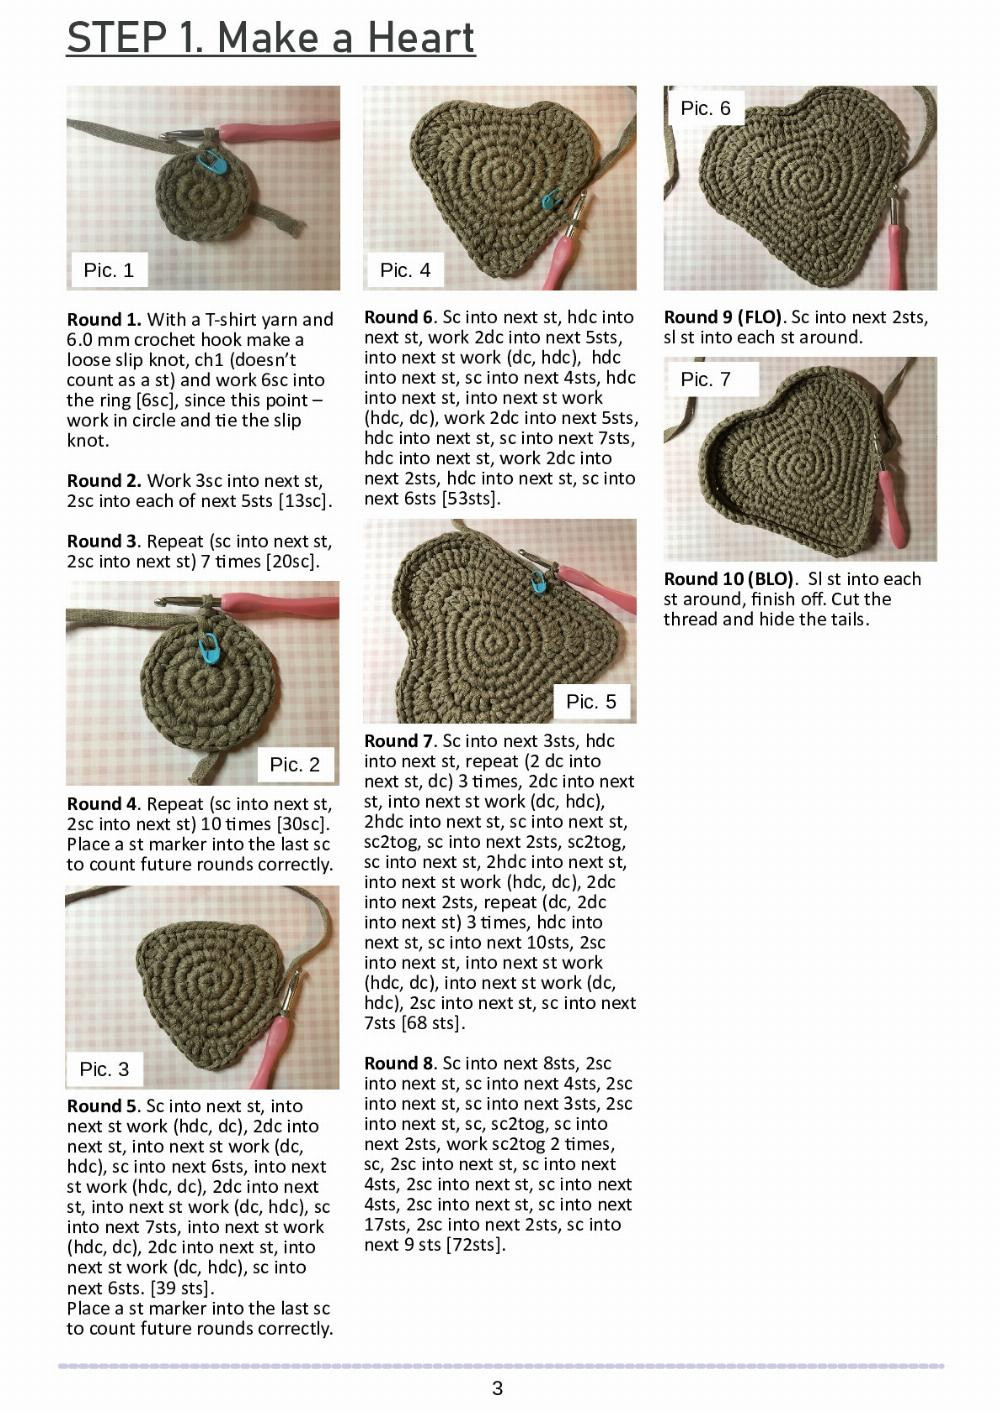 The Heart Sign Pattern